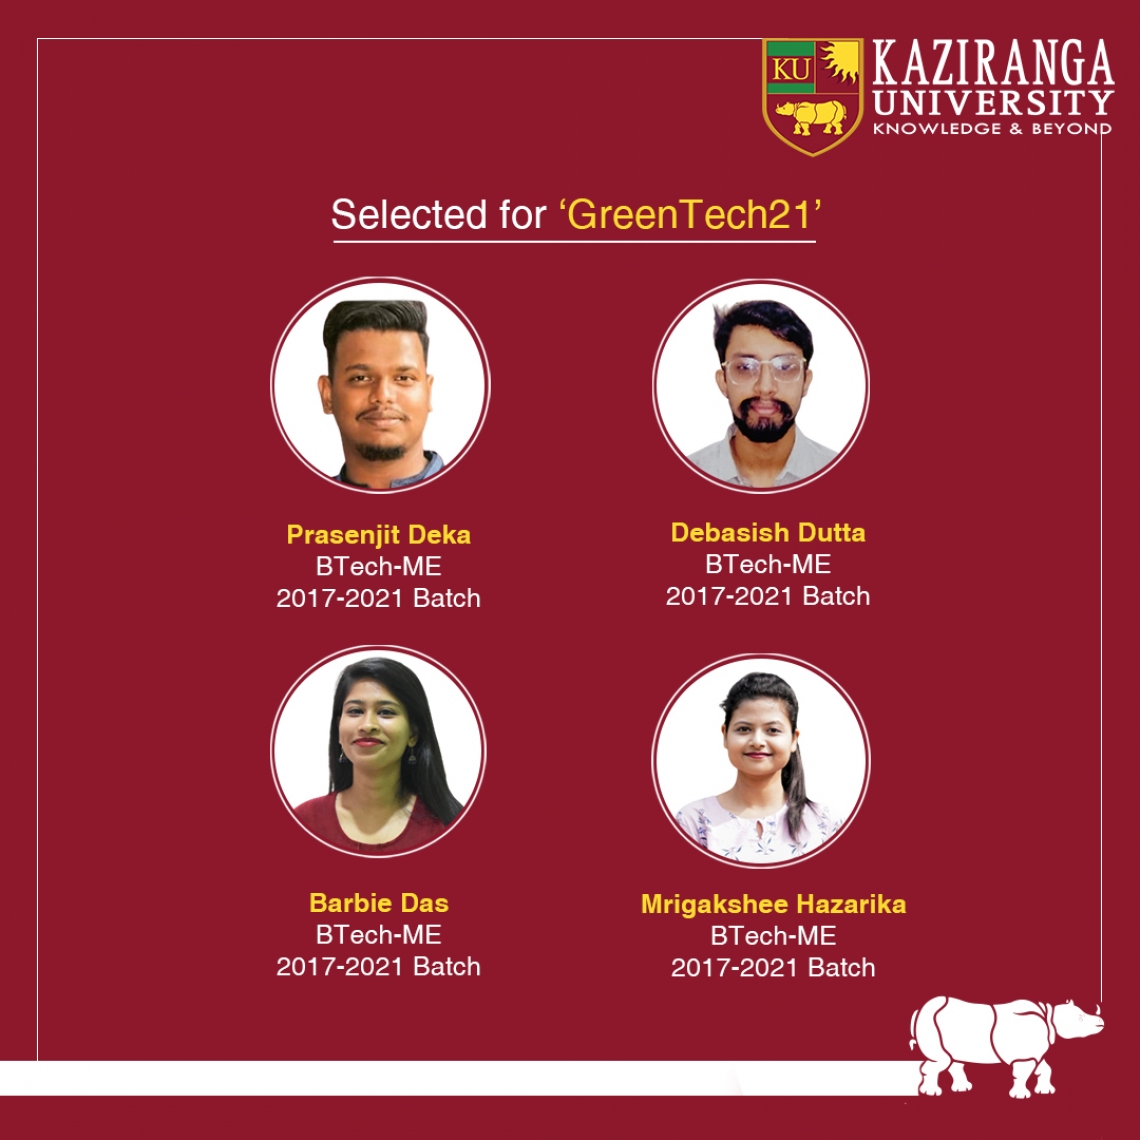 KU students research papers are selected for the 'GreenTech', an international conference held in Chennai, India.